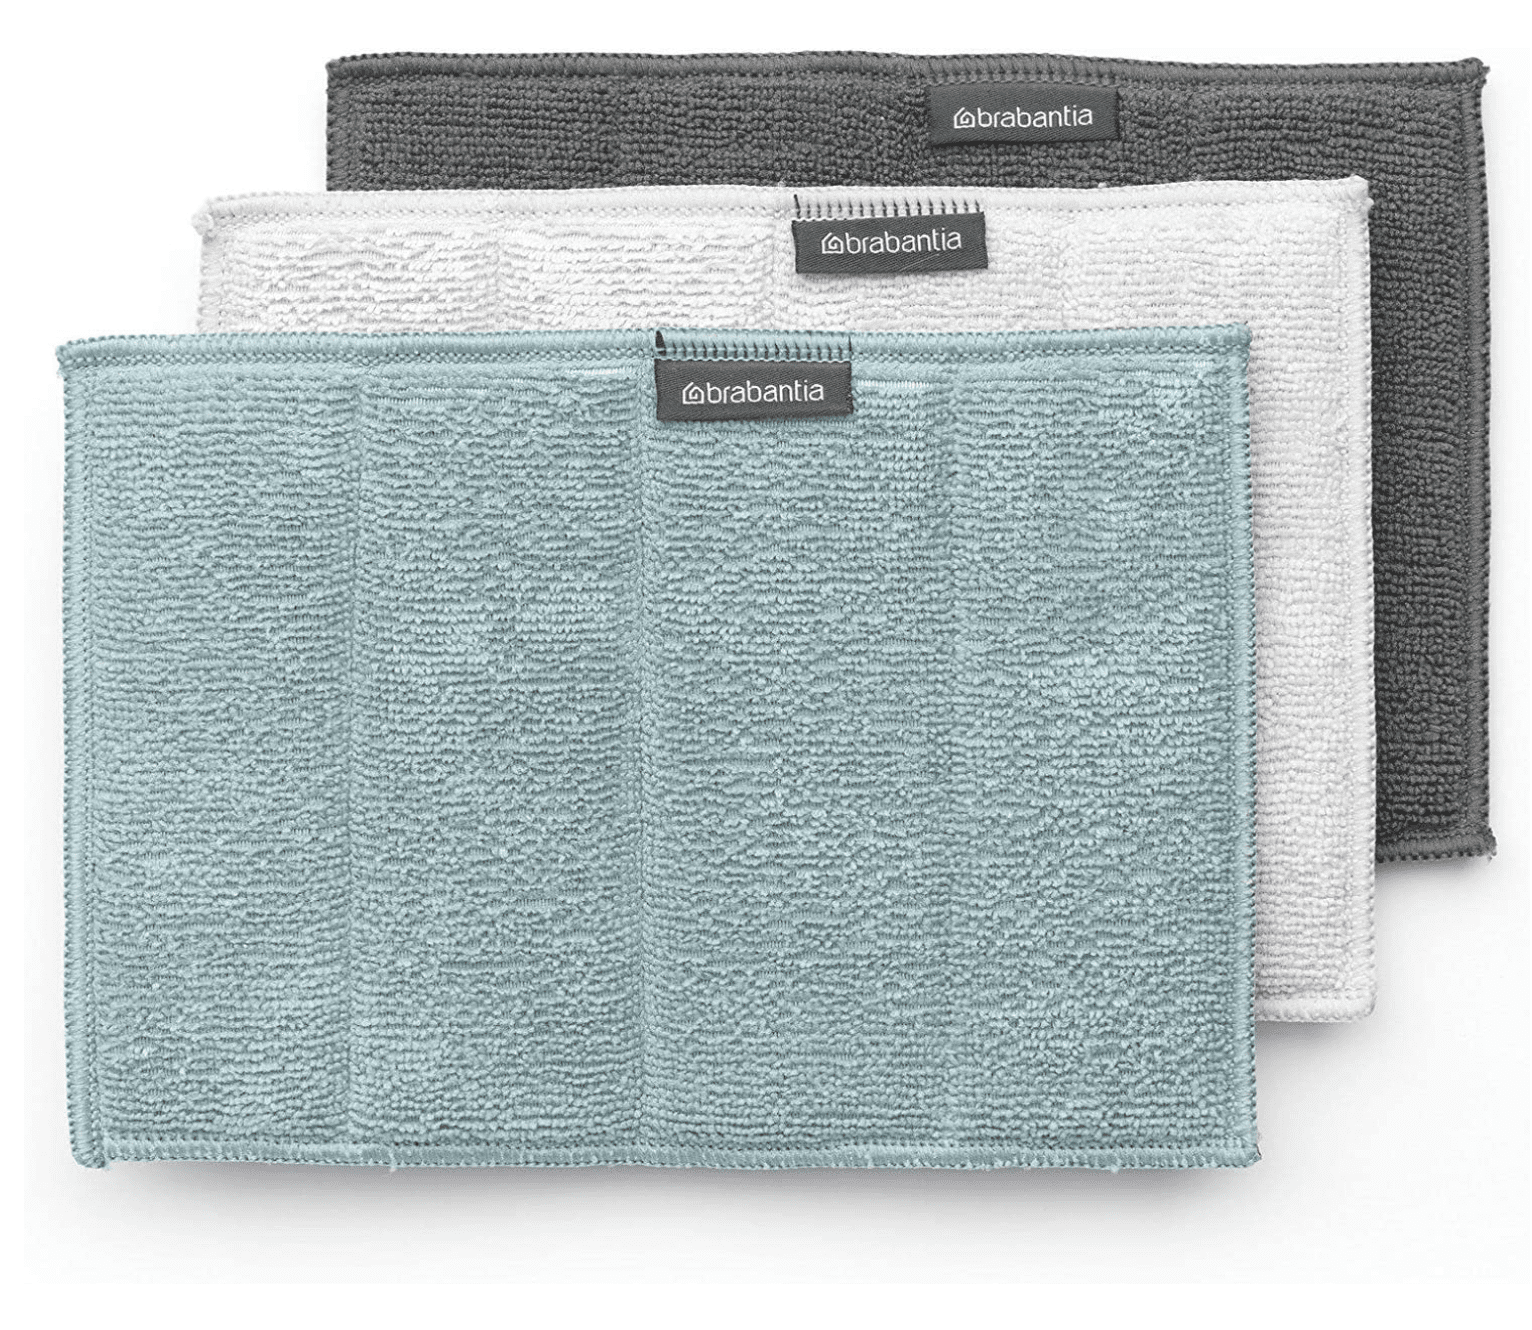 Reviewers Say These $10 Dish Cloths Are 'the Best Dish Cloths Ever